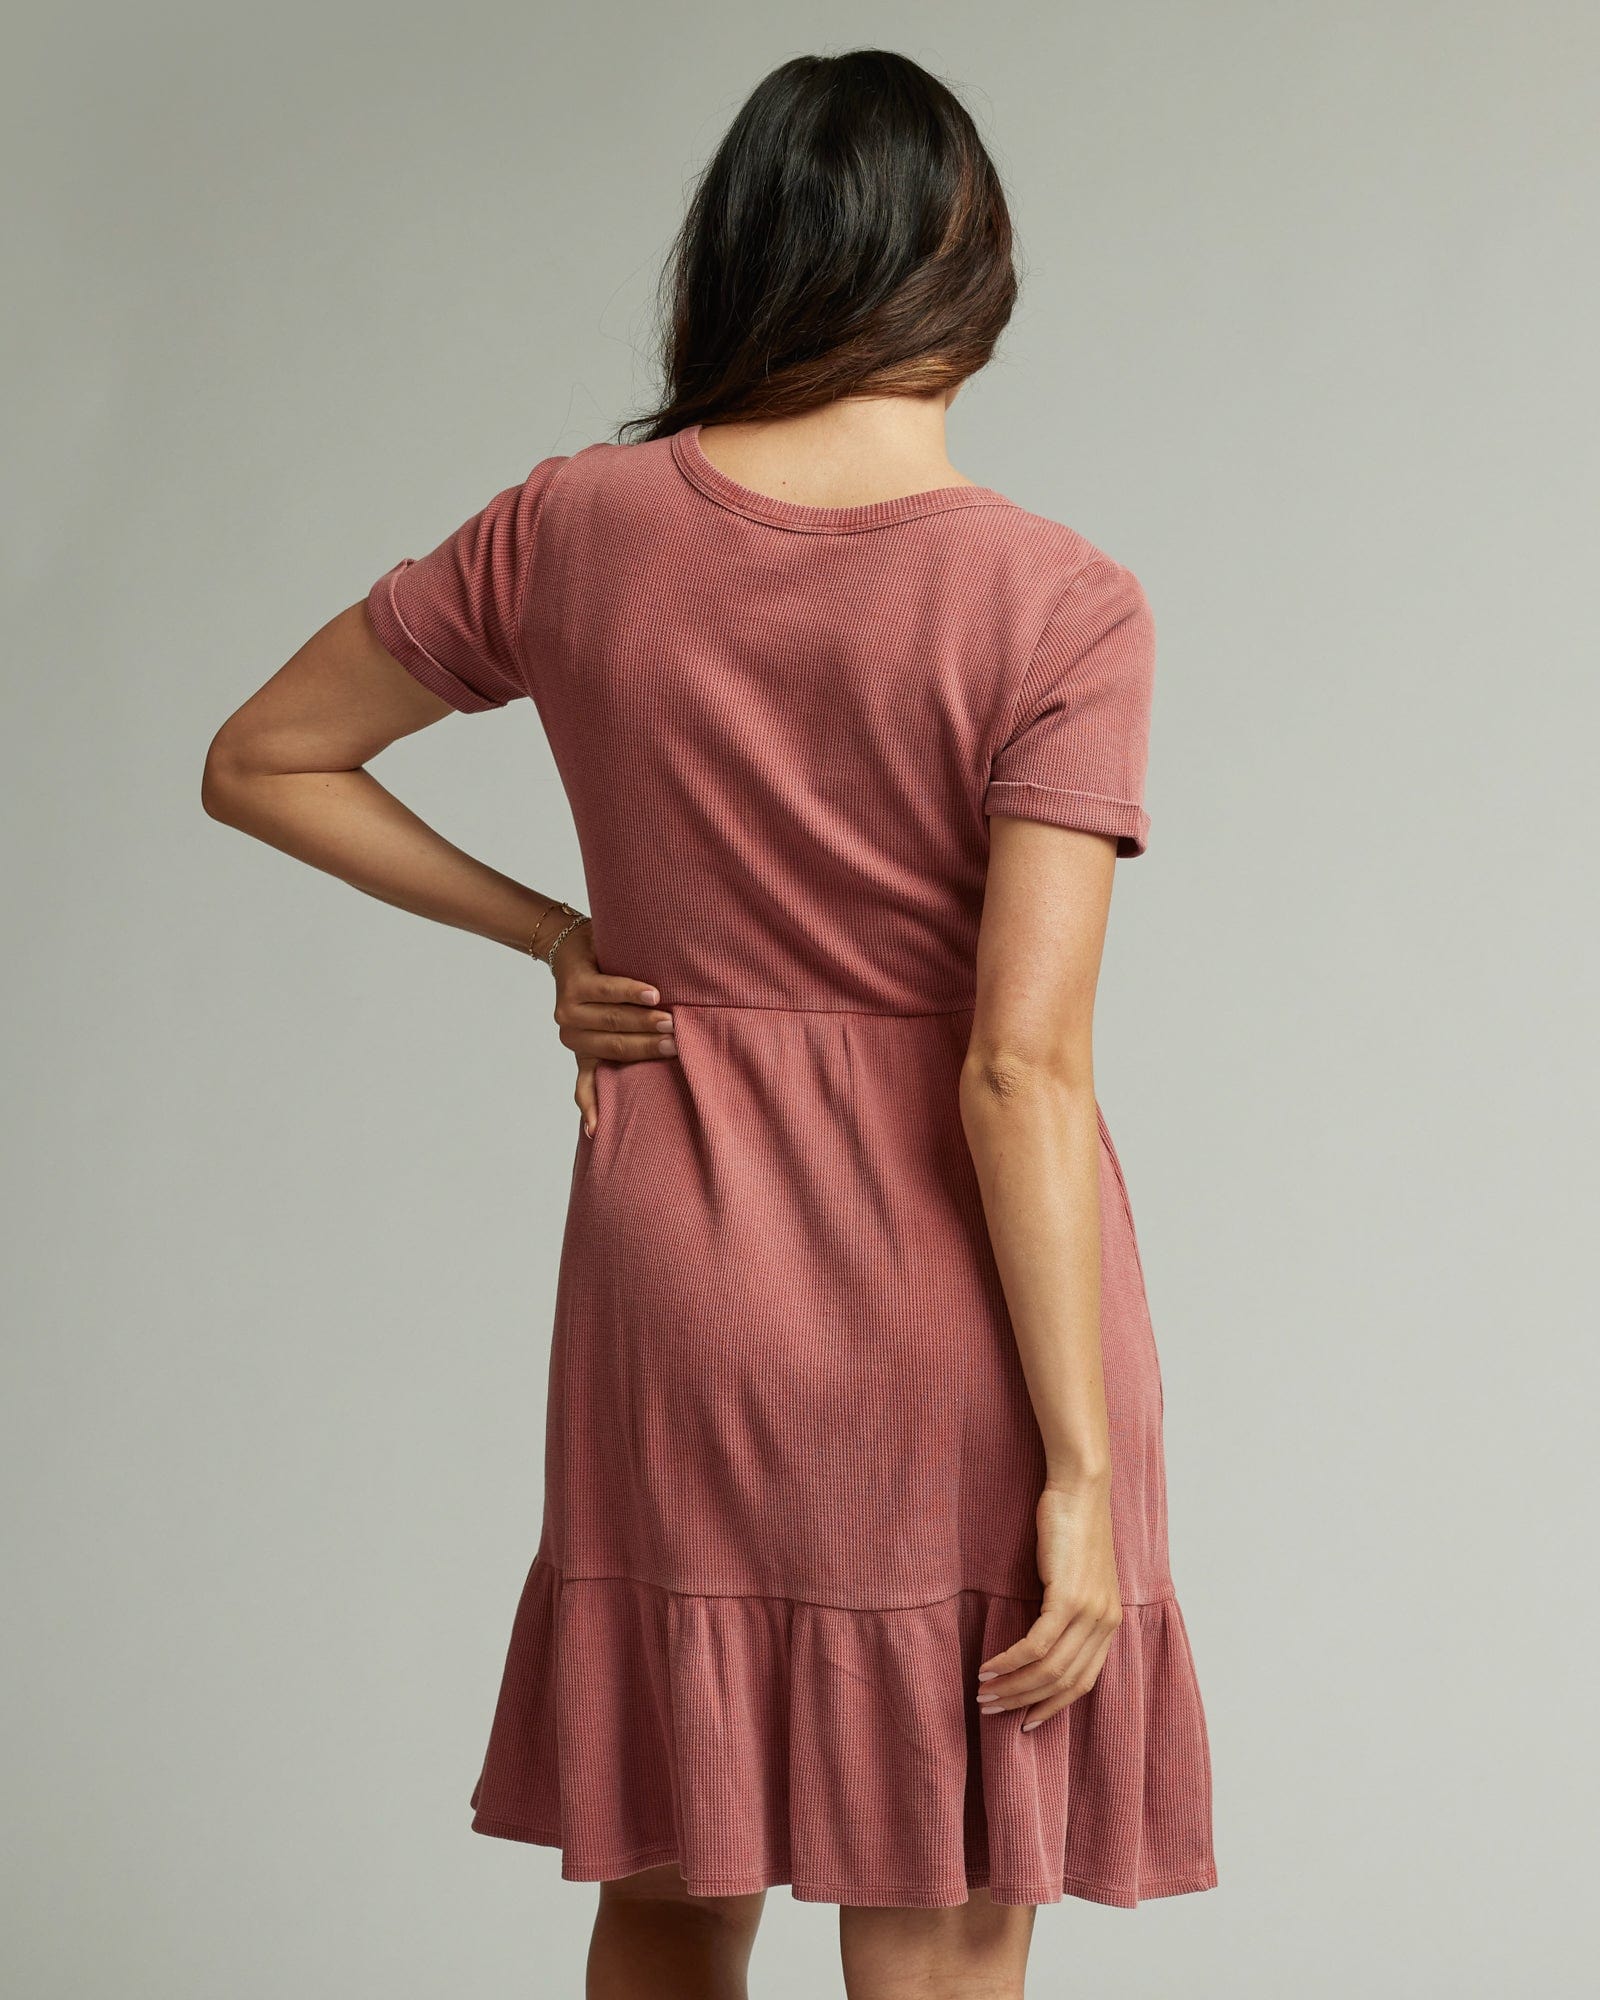 Woman in a short sleeve, waffled textured dress